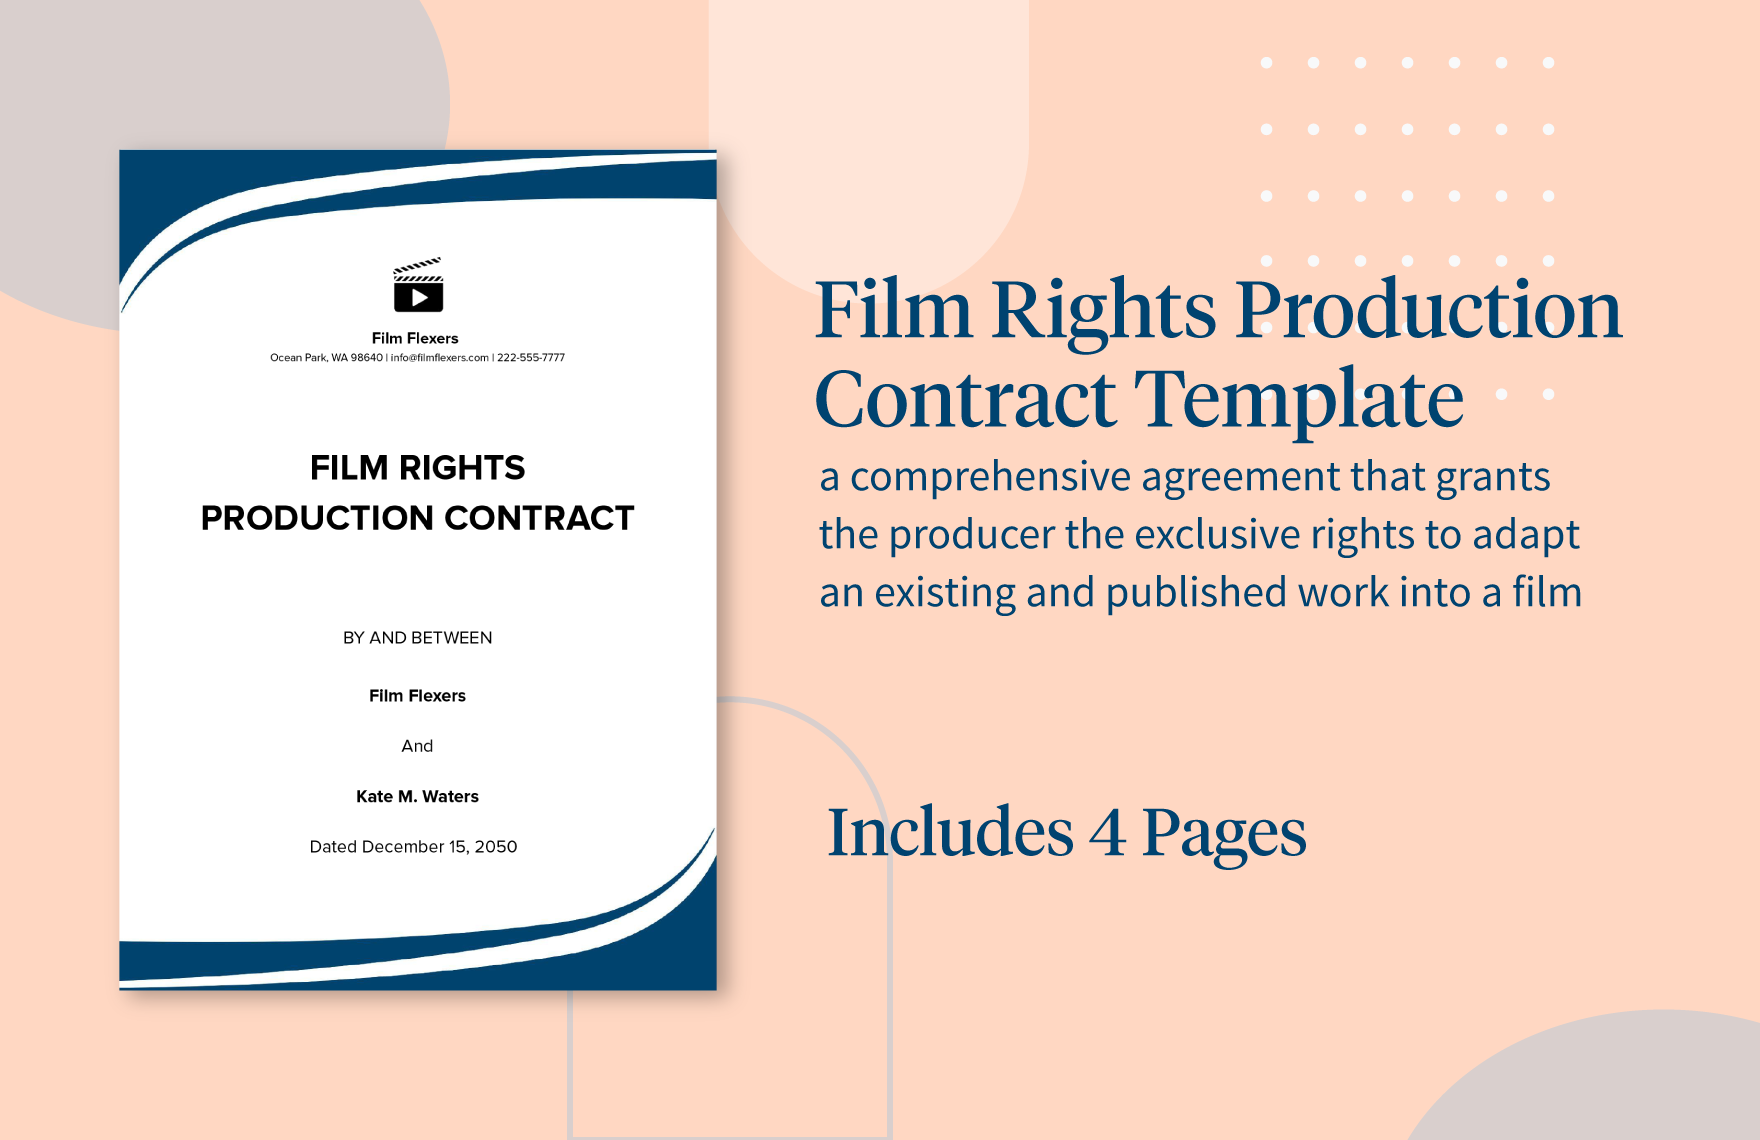 Film Rights Production Contract Template